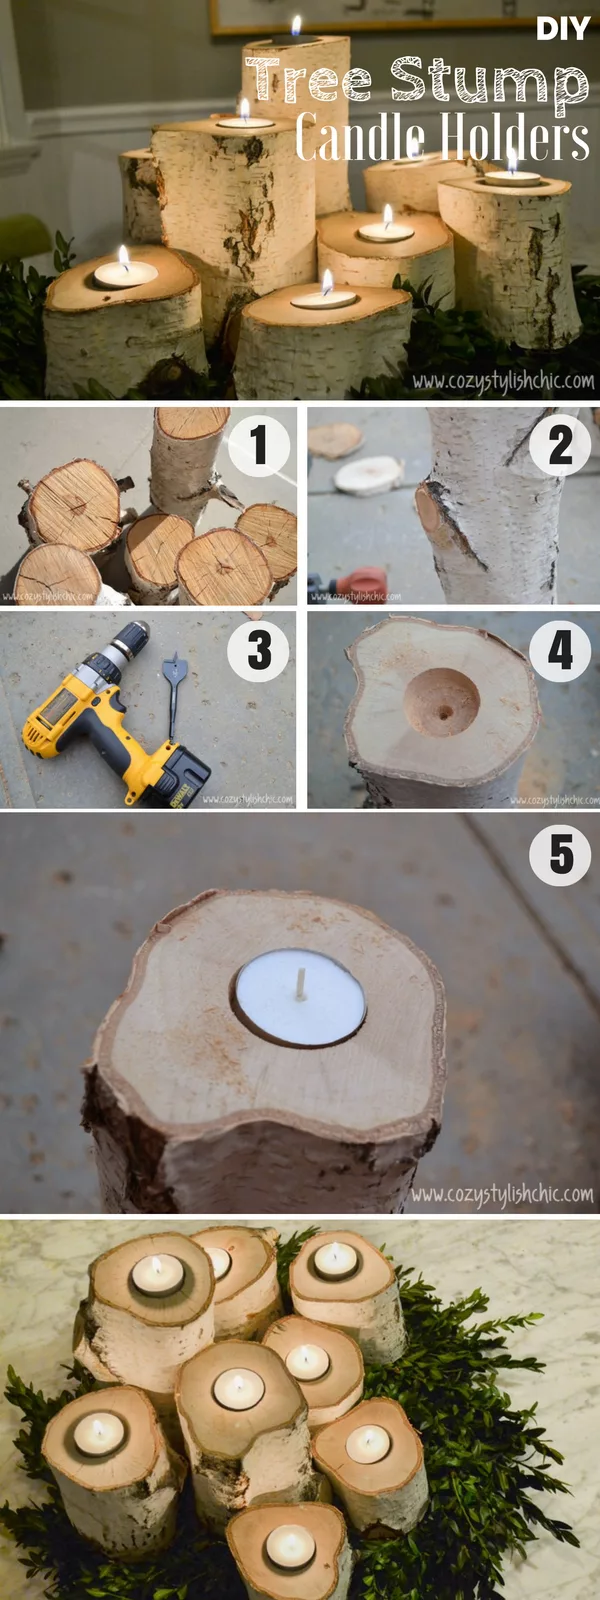 Brilliant rustic easy to make DIY Tree Stump Candle Holders for fall decor